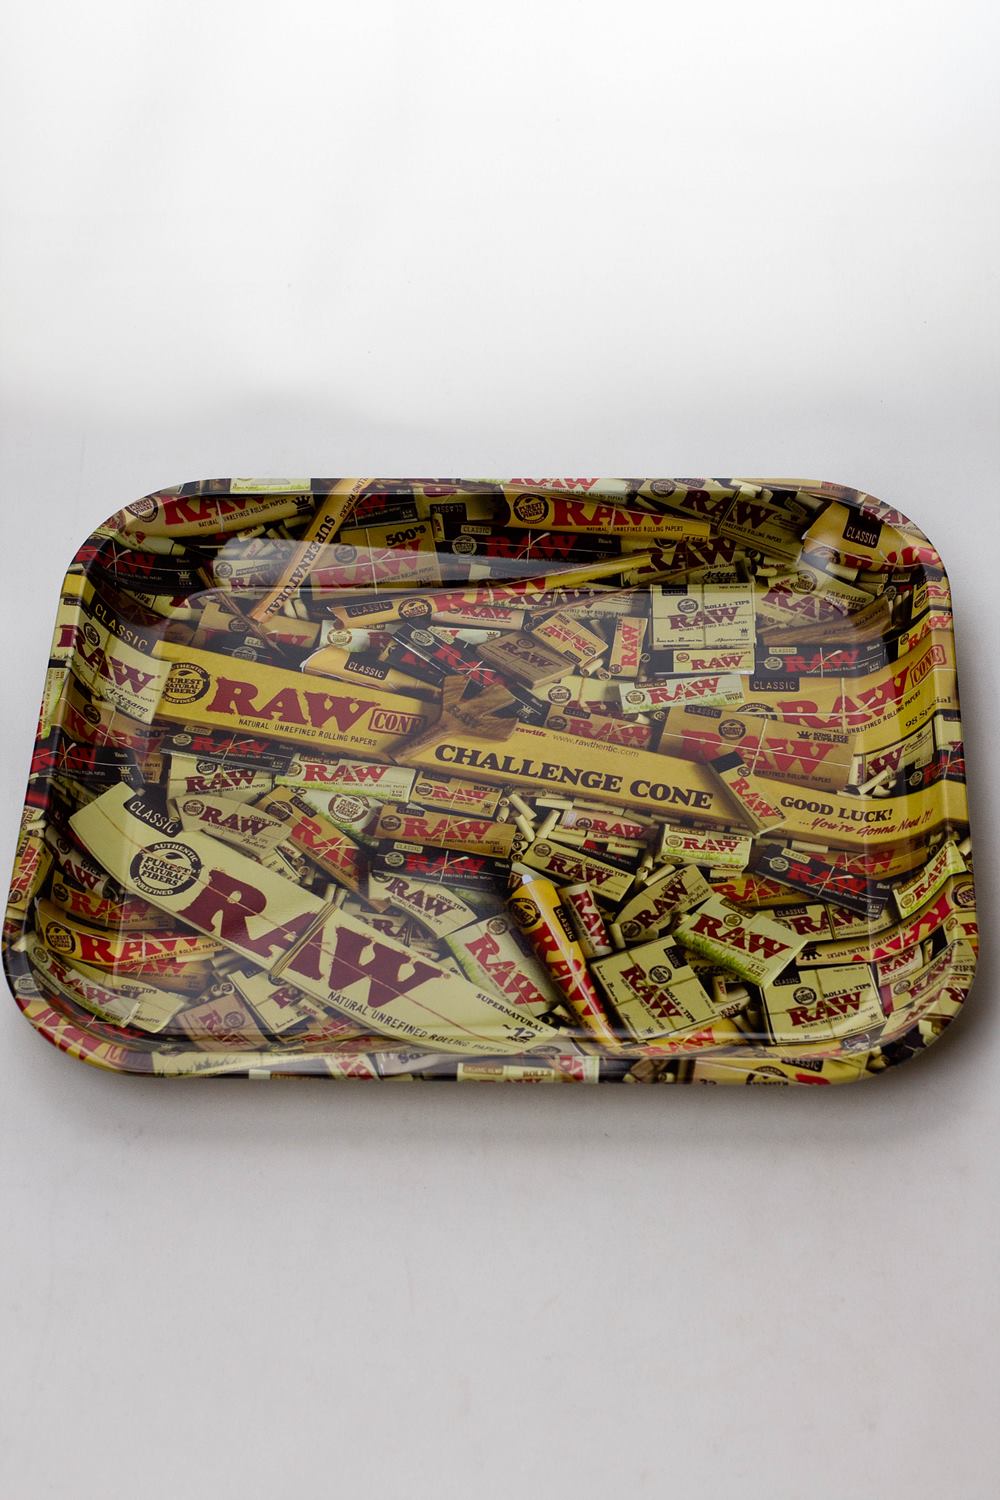 Raw Large size Rolling tray_6